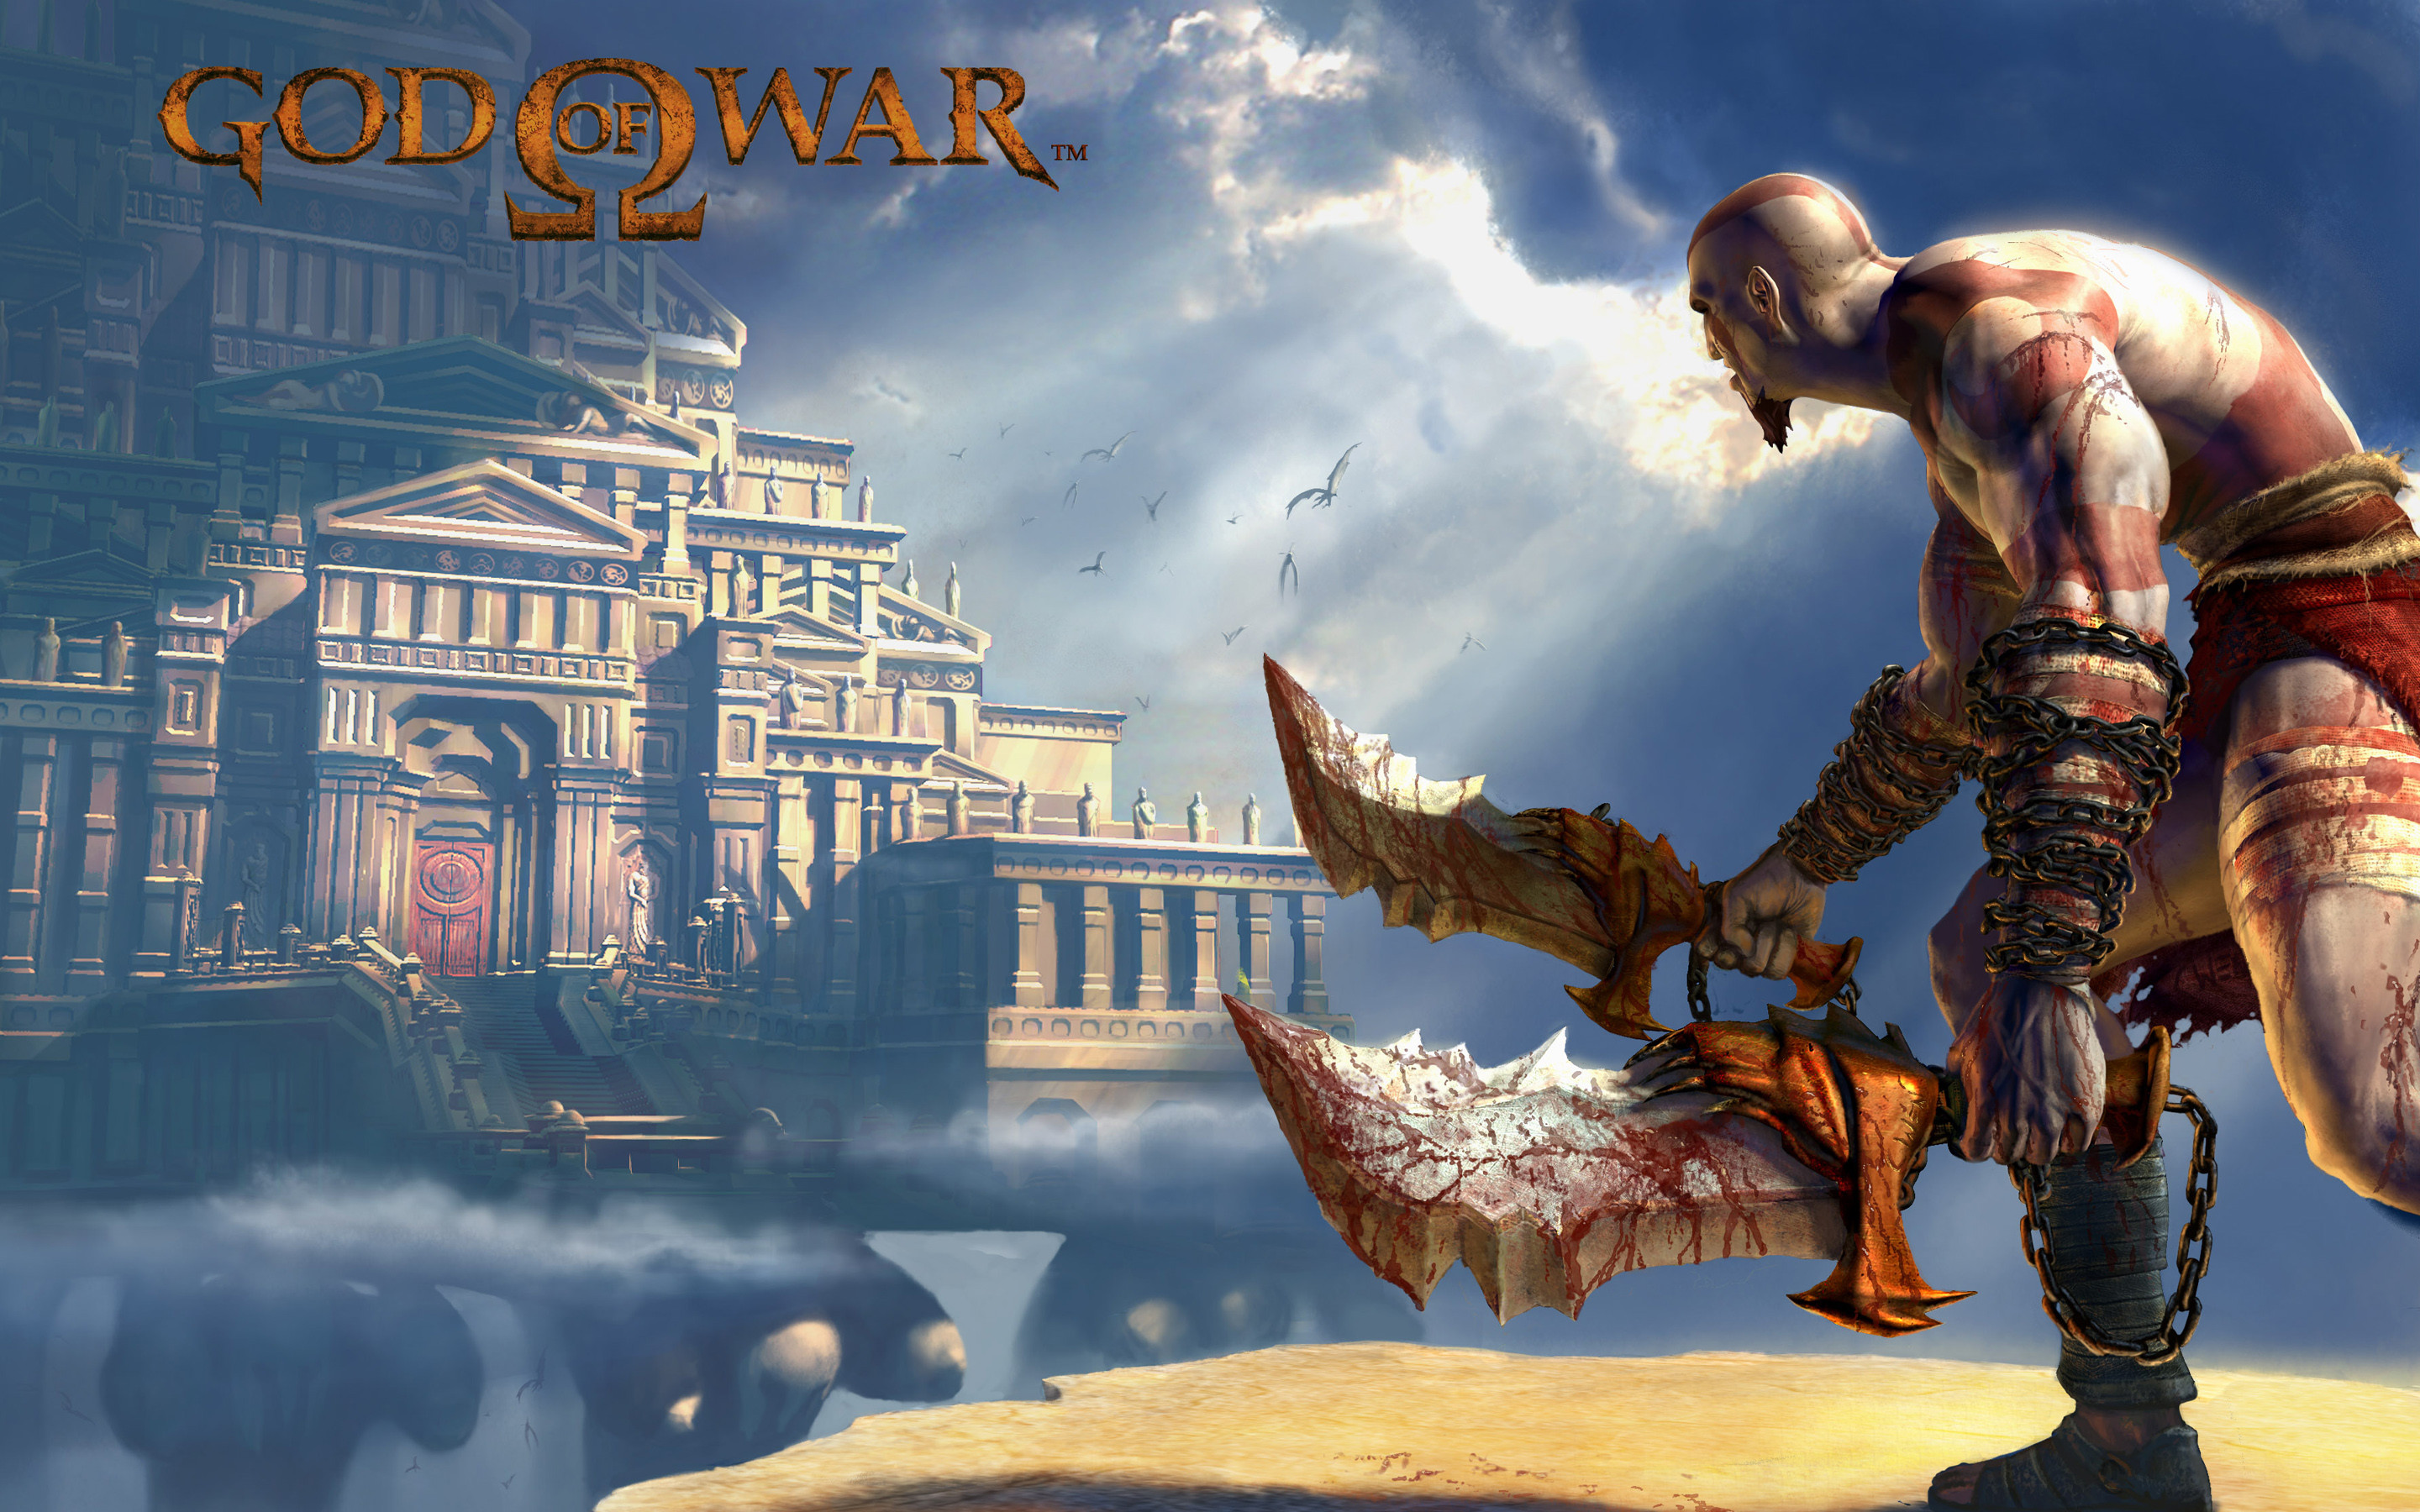 2880x1800 God of War 2 Game - This HD God of War 2 Game wallpaper is based